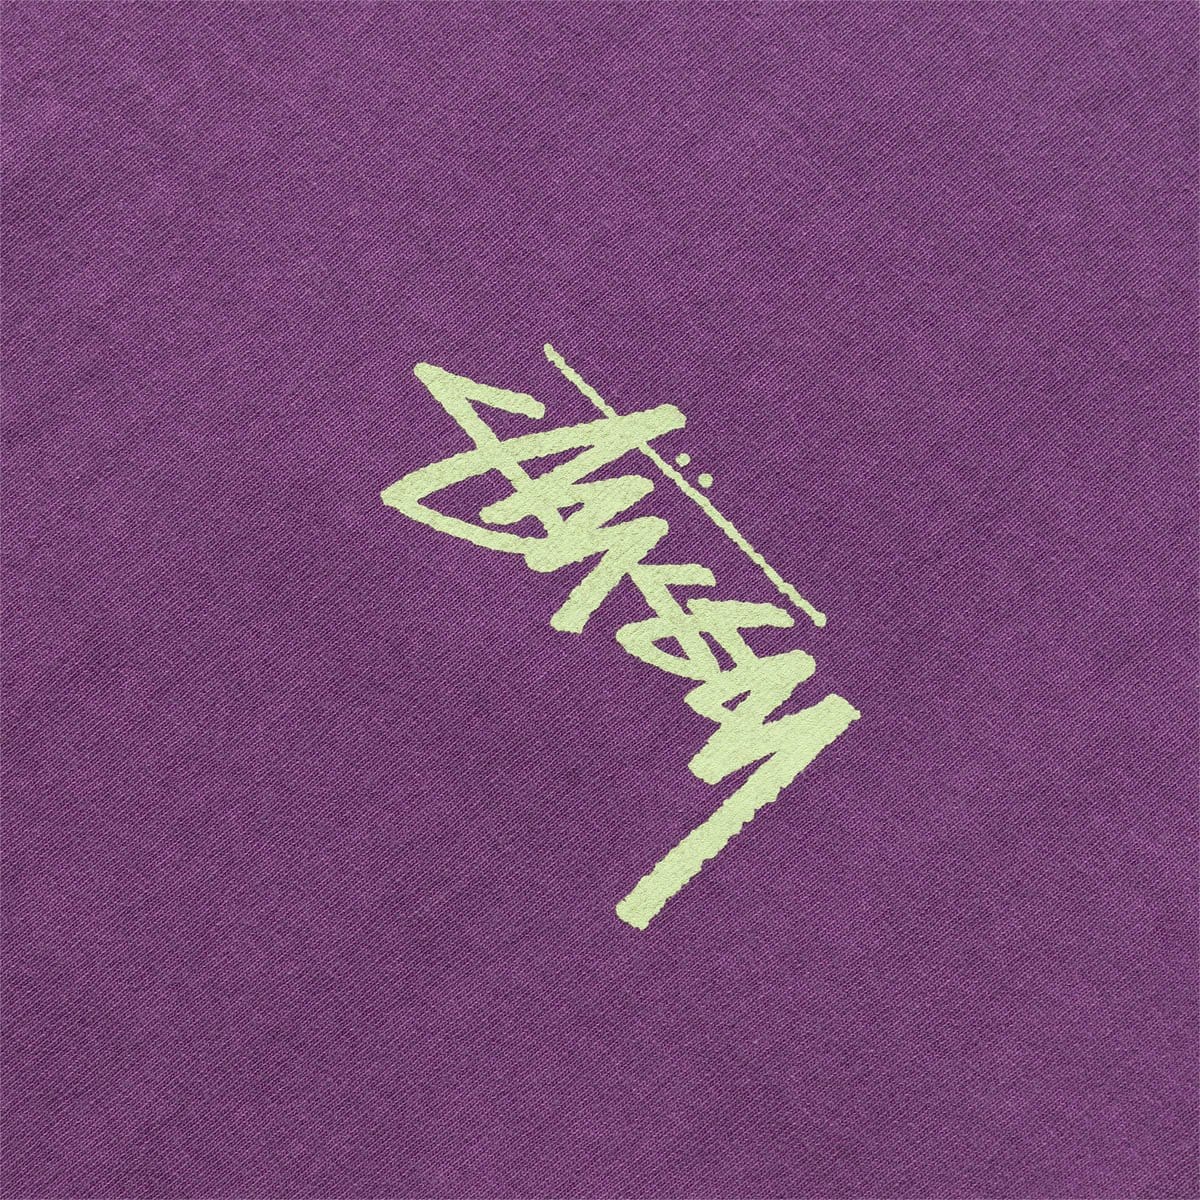 Stüssy T-Shirts YOUNG MODERNS PIGMENT DYED TEE